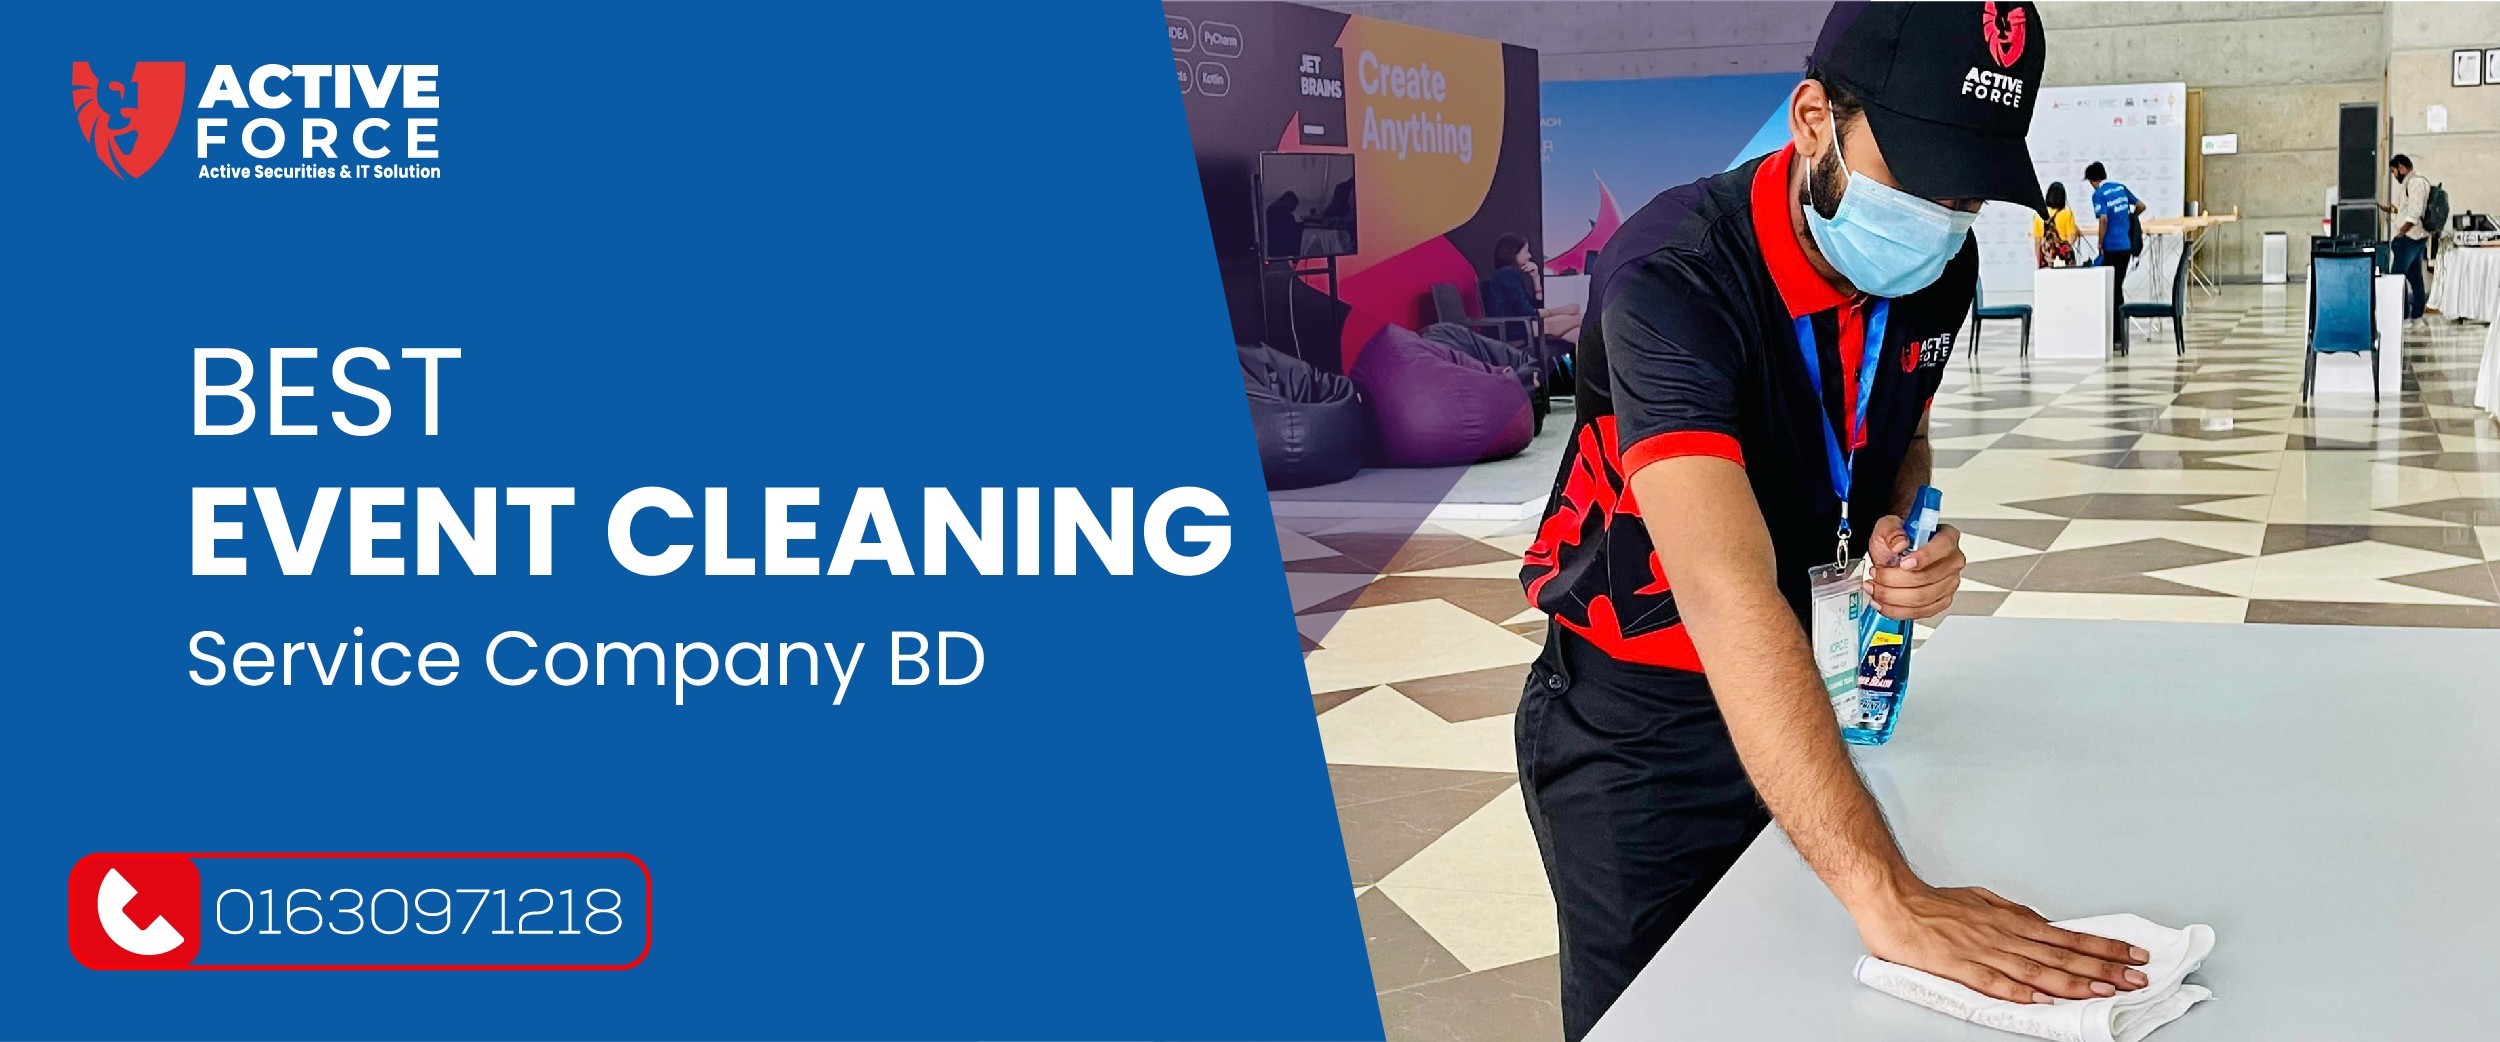 Best Event Cleaning Service Company BD | Active Force